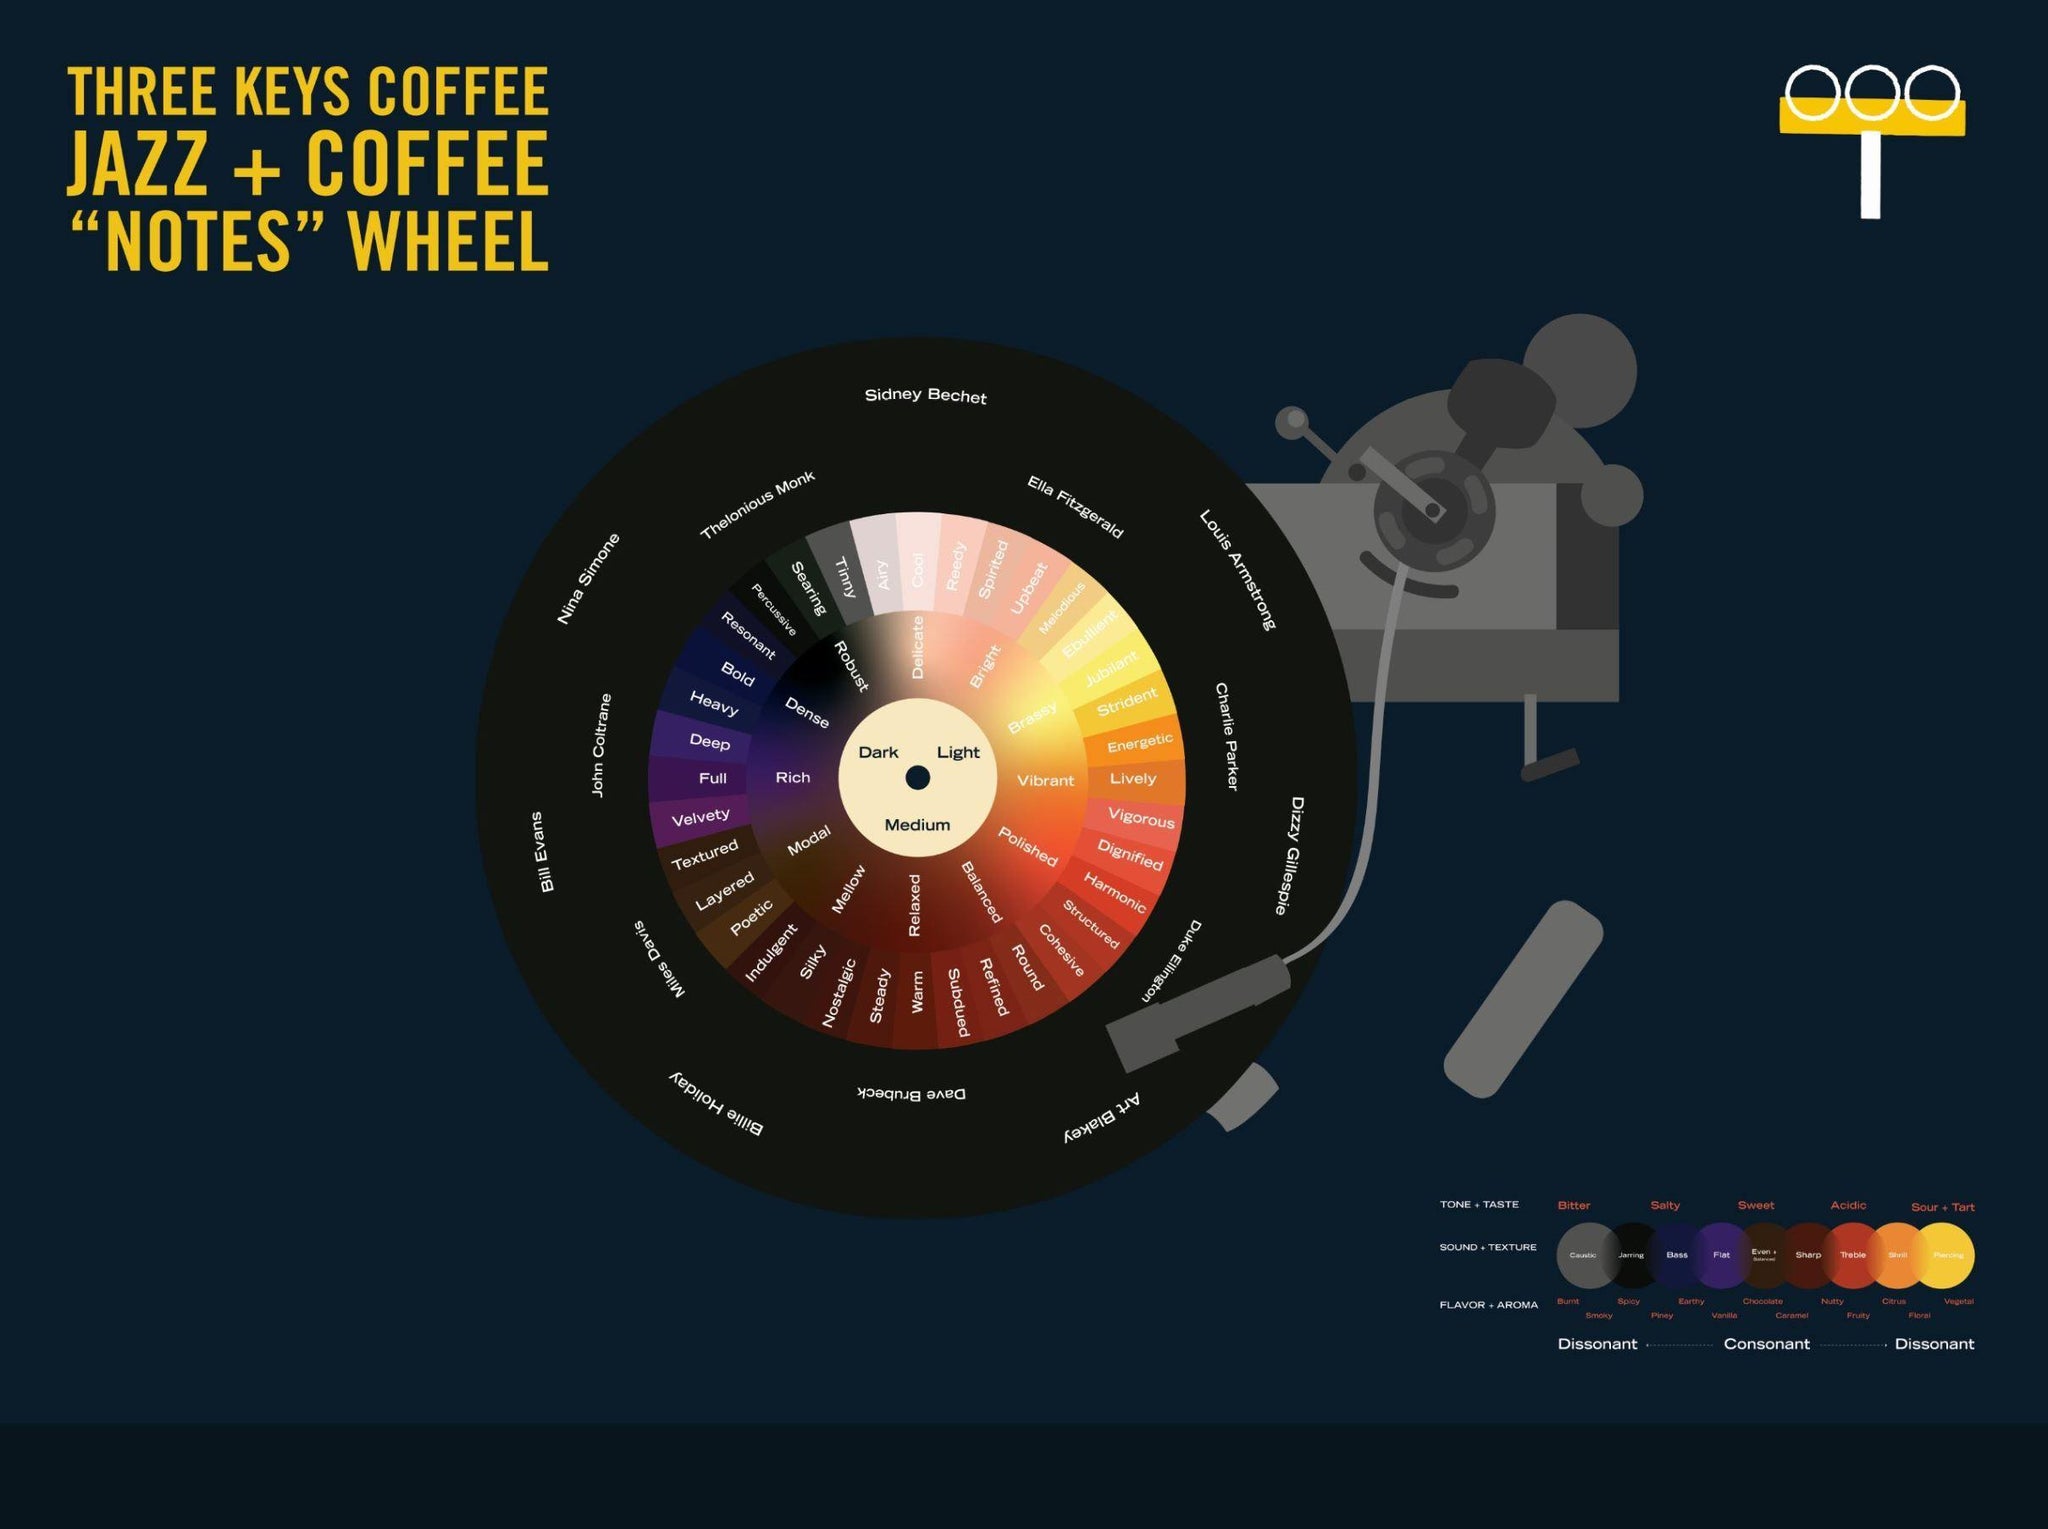 Three Keys Coffee Jazz and Coffee Flavor Notes Wheel; Turntable with Jazz artists and coffee descriptor words